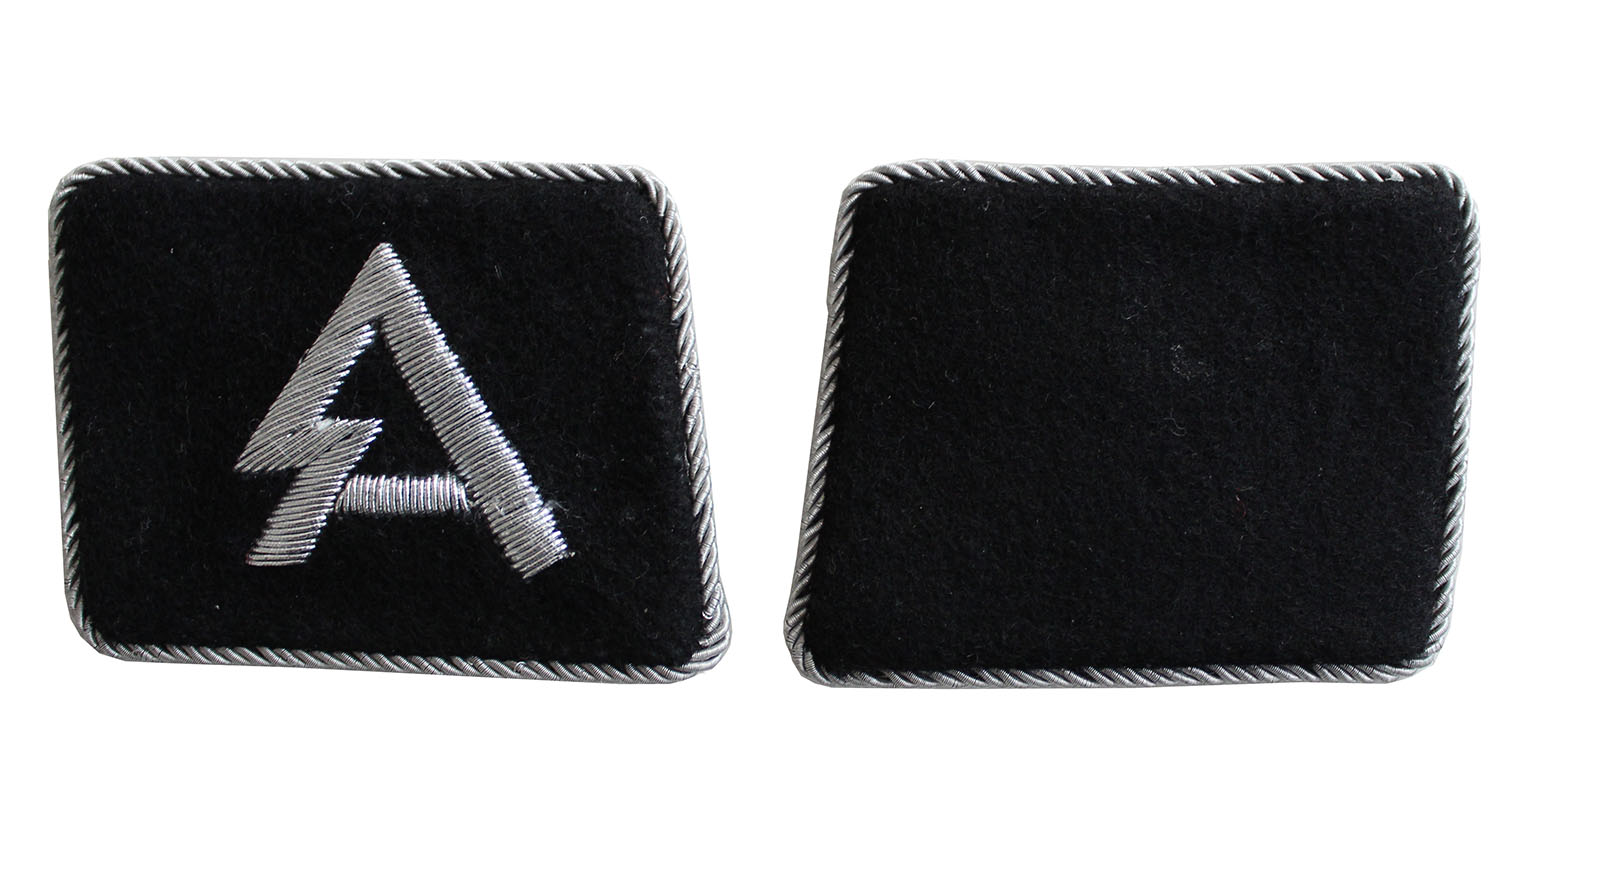 18th SS FREIWILLIGEN DIVISION, PANZERGRENADIER DIVISION HORST WESSEL  OFFICER  COLLAR TABS